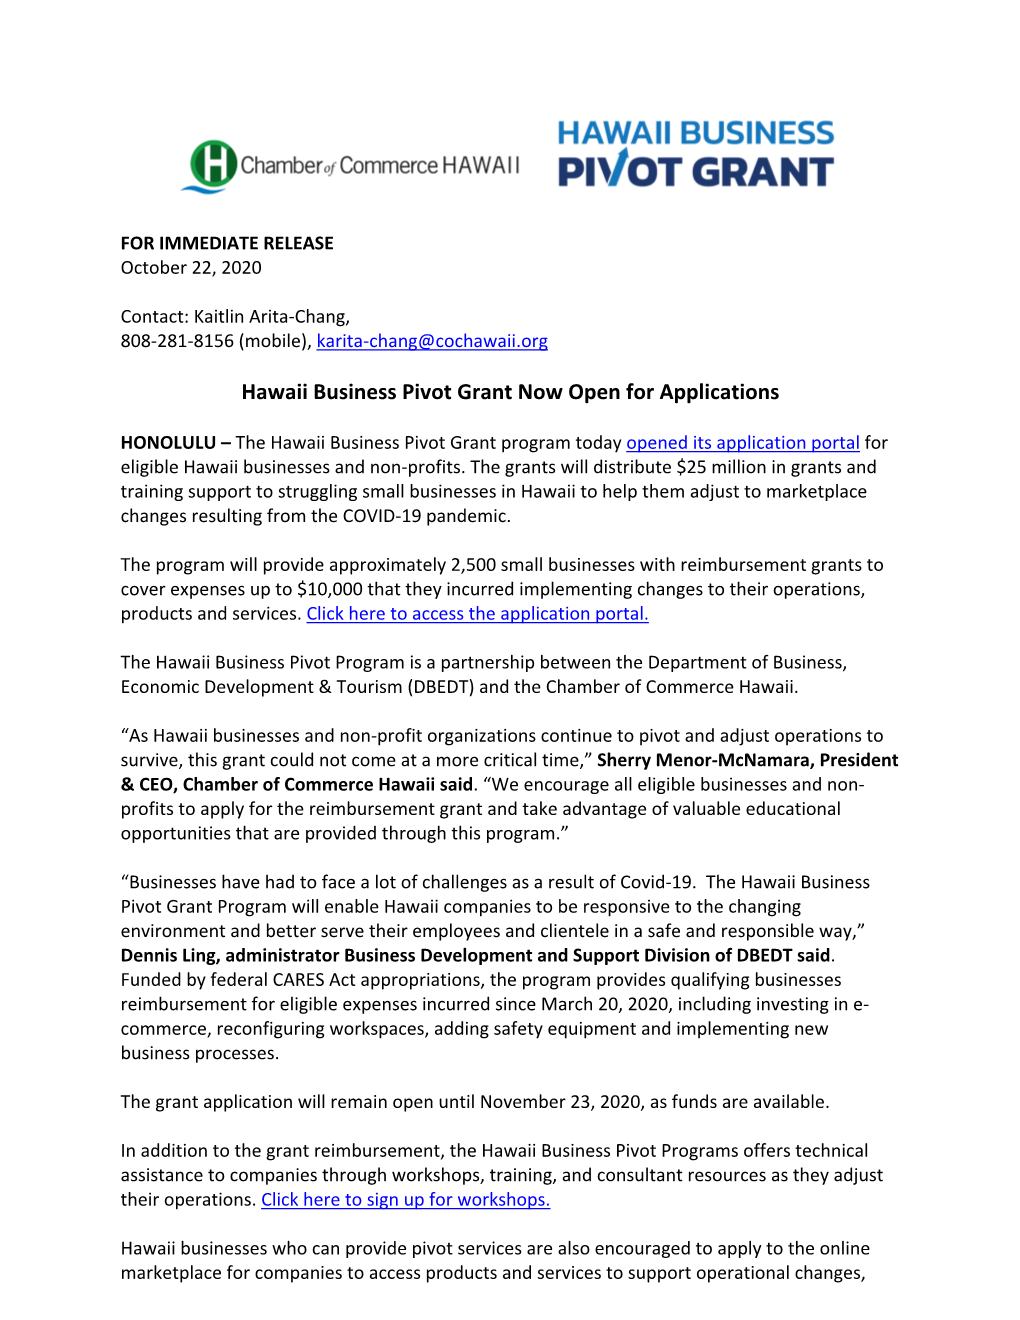 Hawaii Business Pivot Grant Now Open for Applications